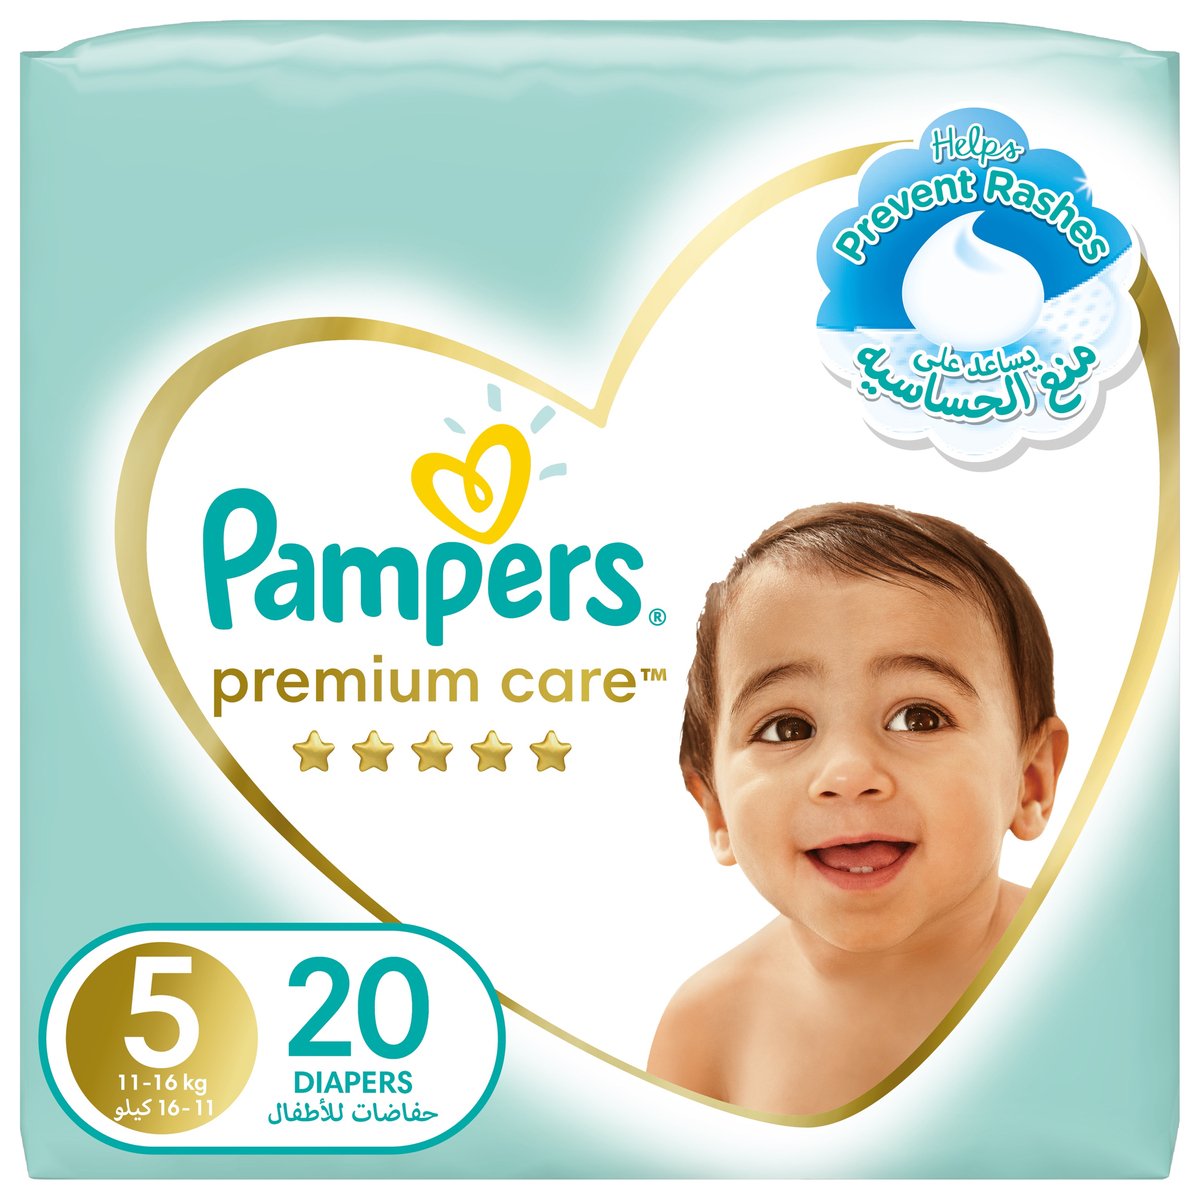 Pampers Premium Care Diapers Size 5, 11-16kg The Softest Diaper 20pcs